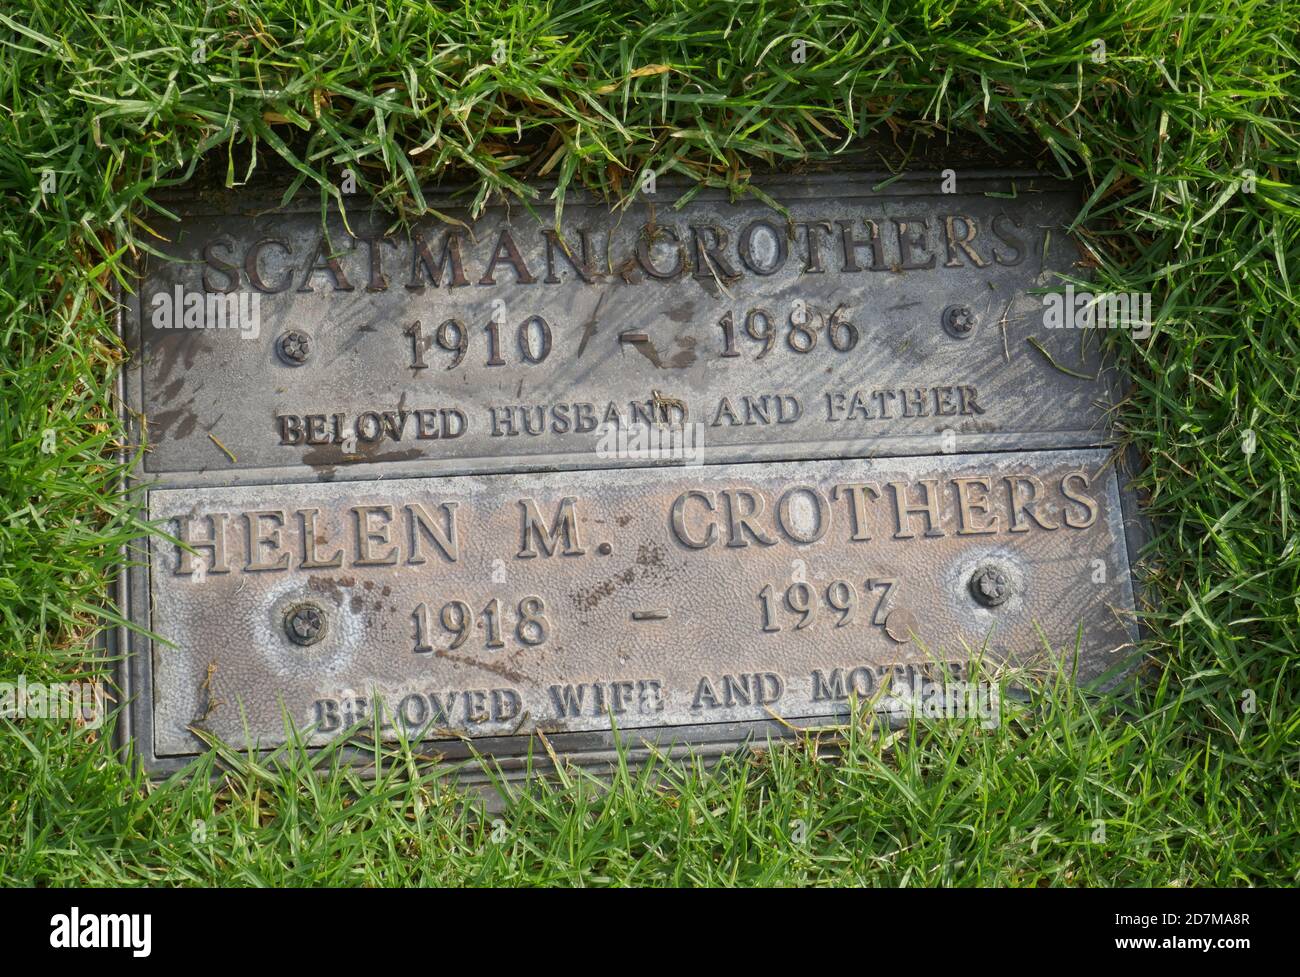 Los Angeles, California, USA 22nd October 2020 A general view of atmosphere of Scatman Crother's Grave at Forest Lawn Memorial Park on October 22, 2020 in Los Angeles, California, USA. Photo by Barry King/Alamy Stock Photo Stock Photo